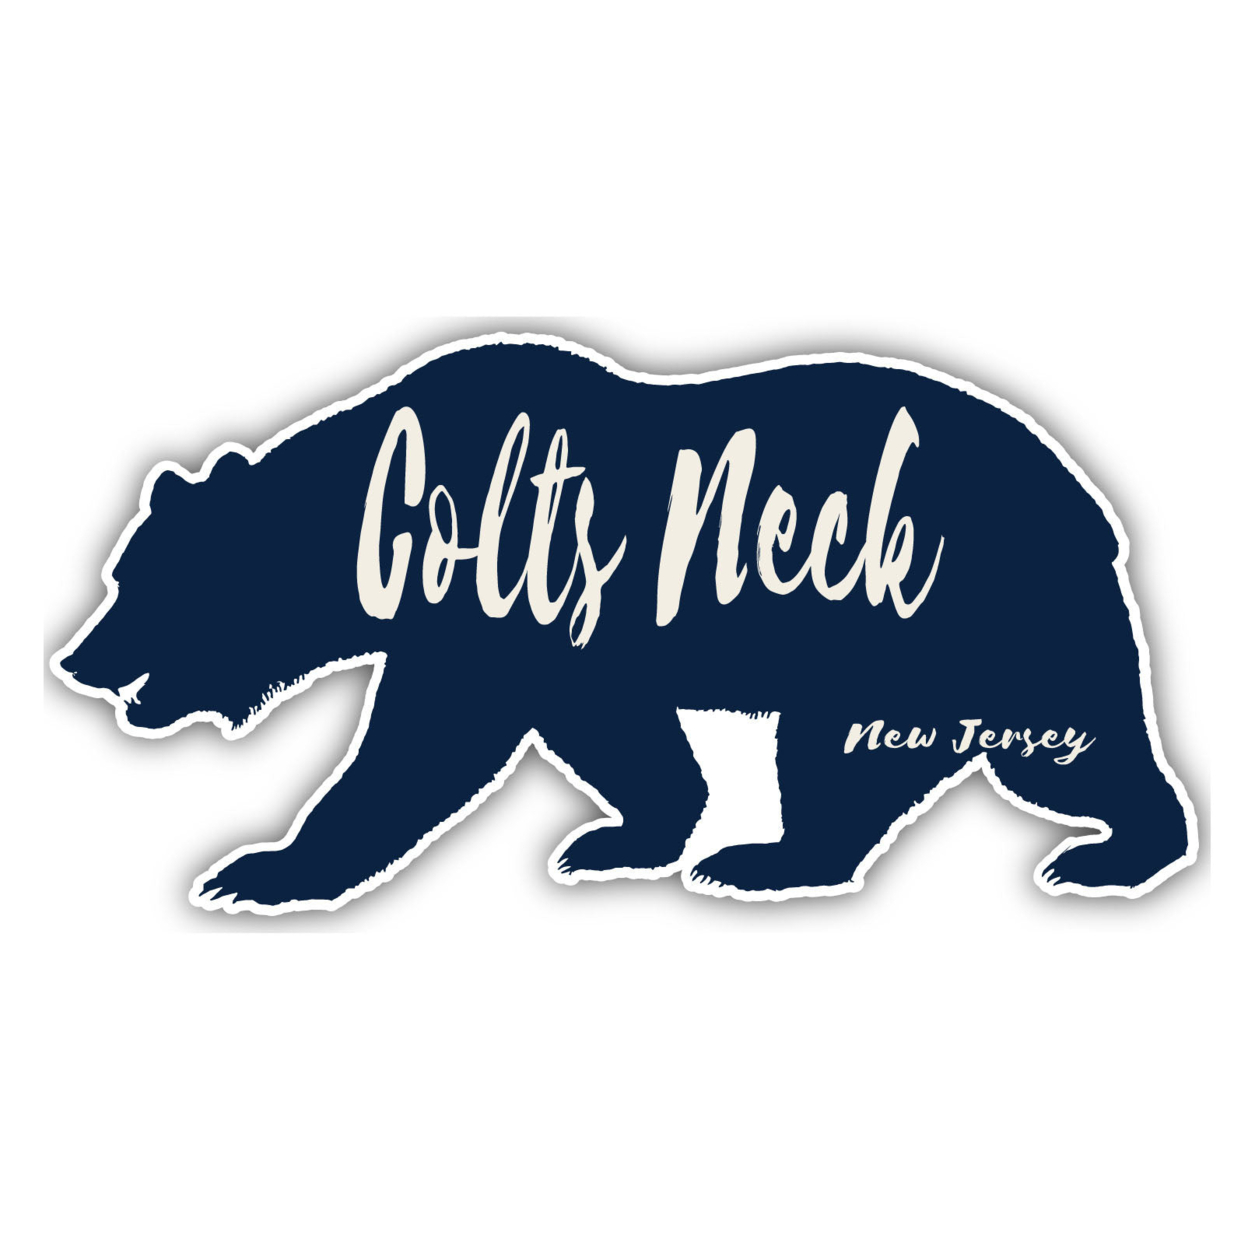 Colts Neck New Jersey Souvenir Decorative Stickers (Choose Theme And Size) - 4-Pack, 10-Inch, Bear